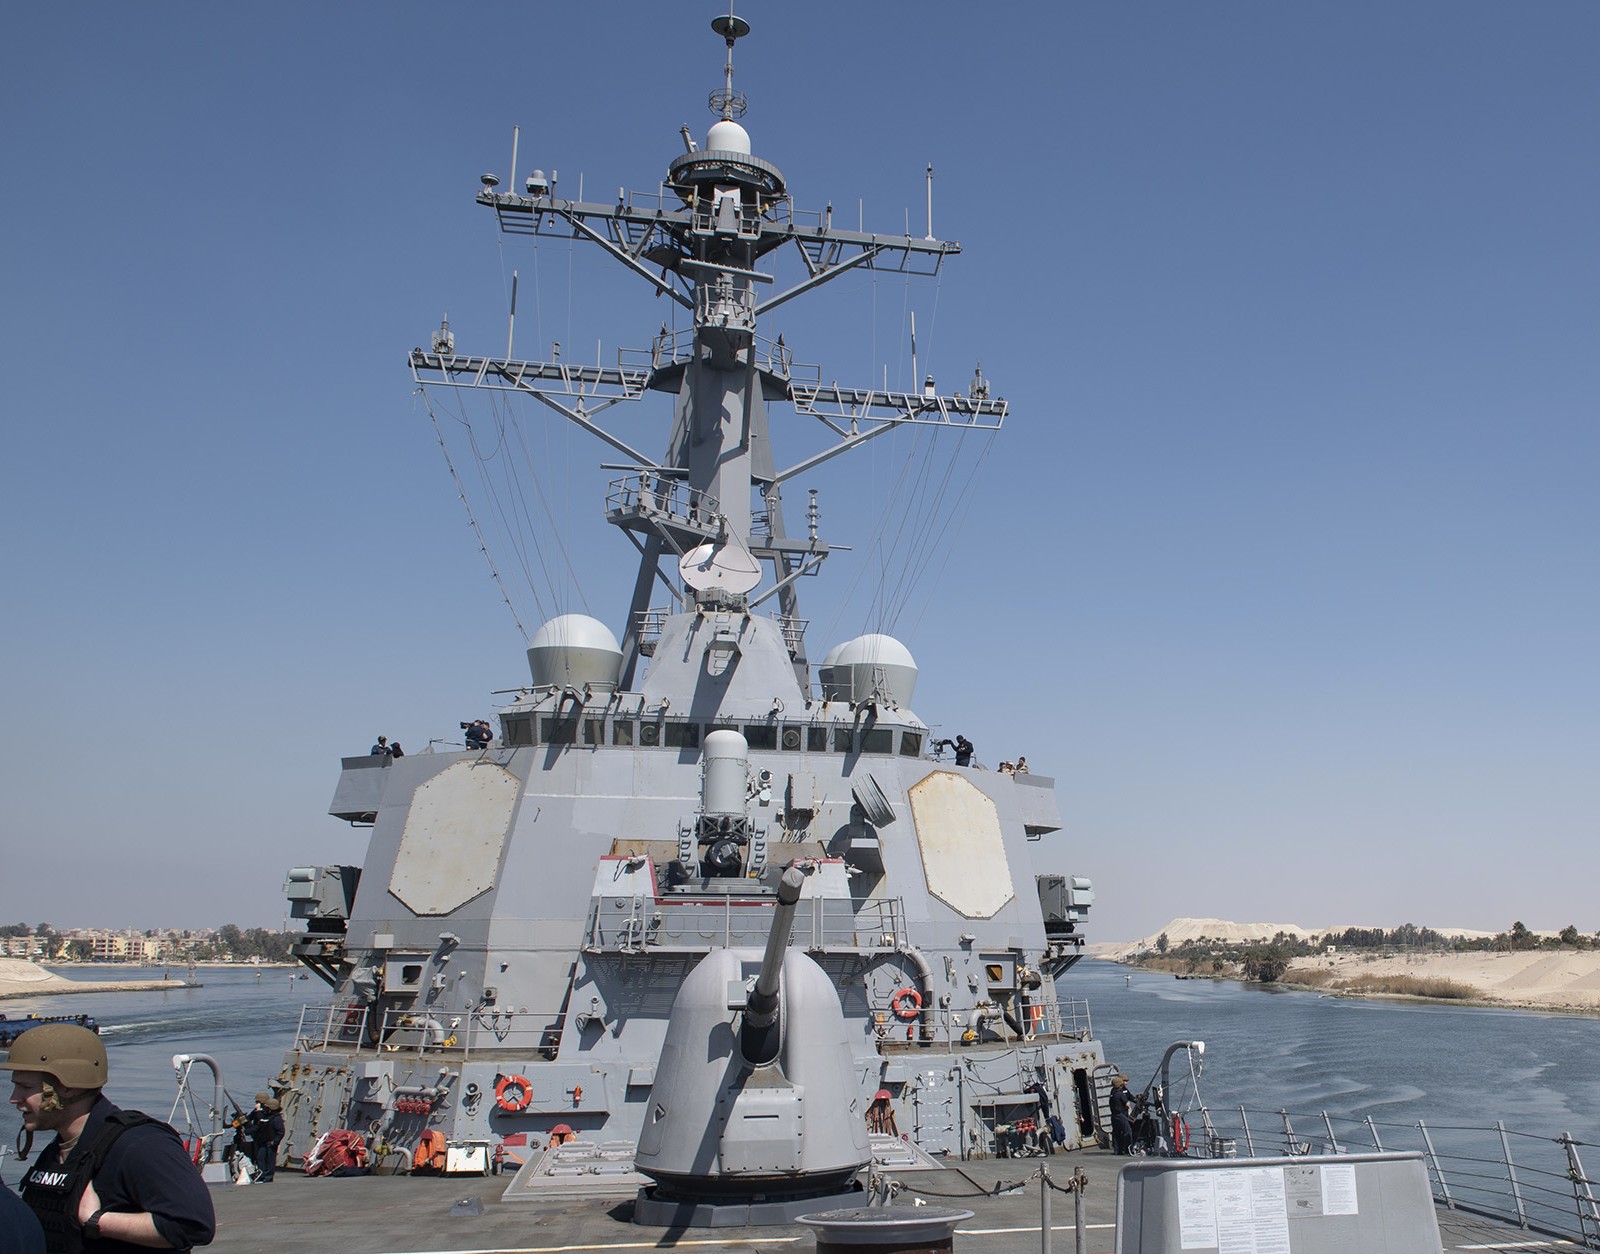 ddg-74 uss mcfaul guided missile destroyer arleigh burke class aegis us navy suez canal 14